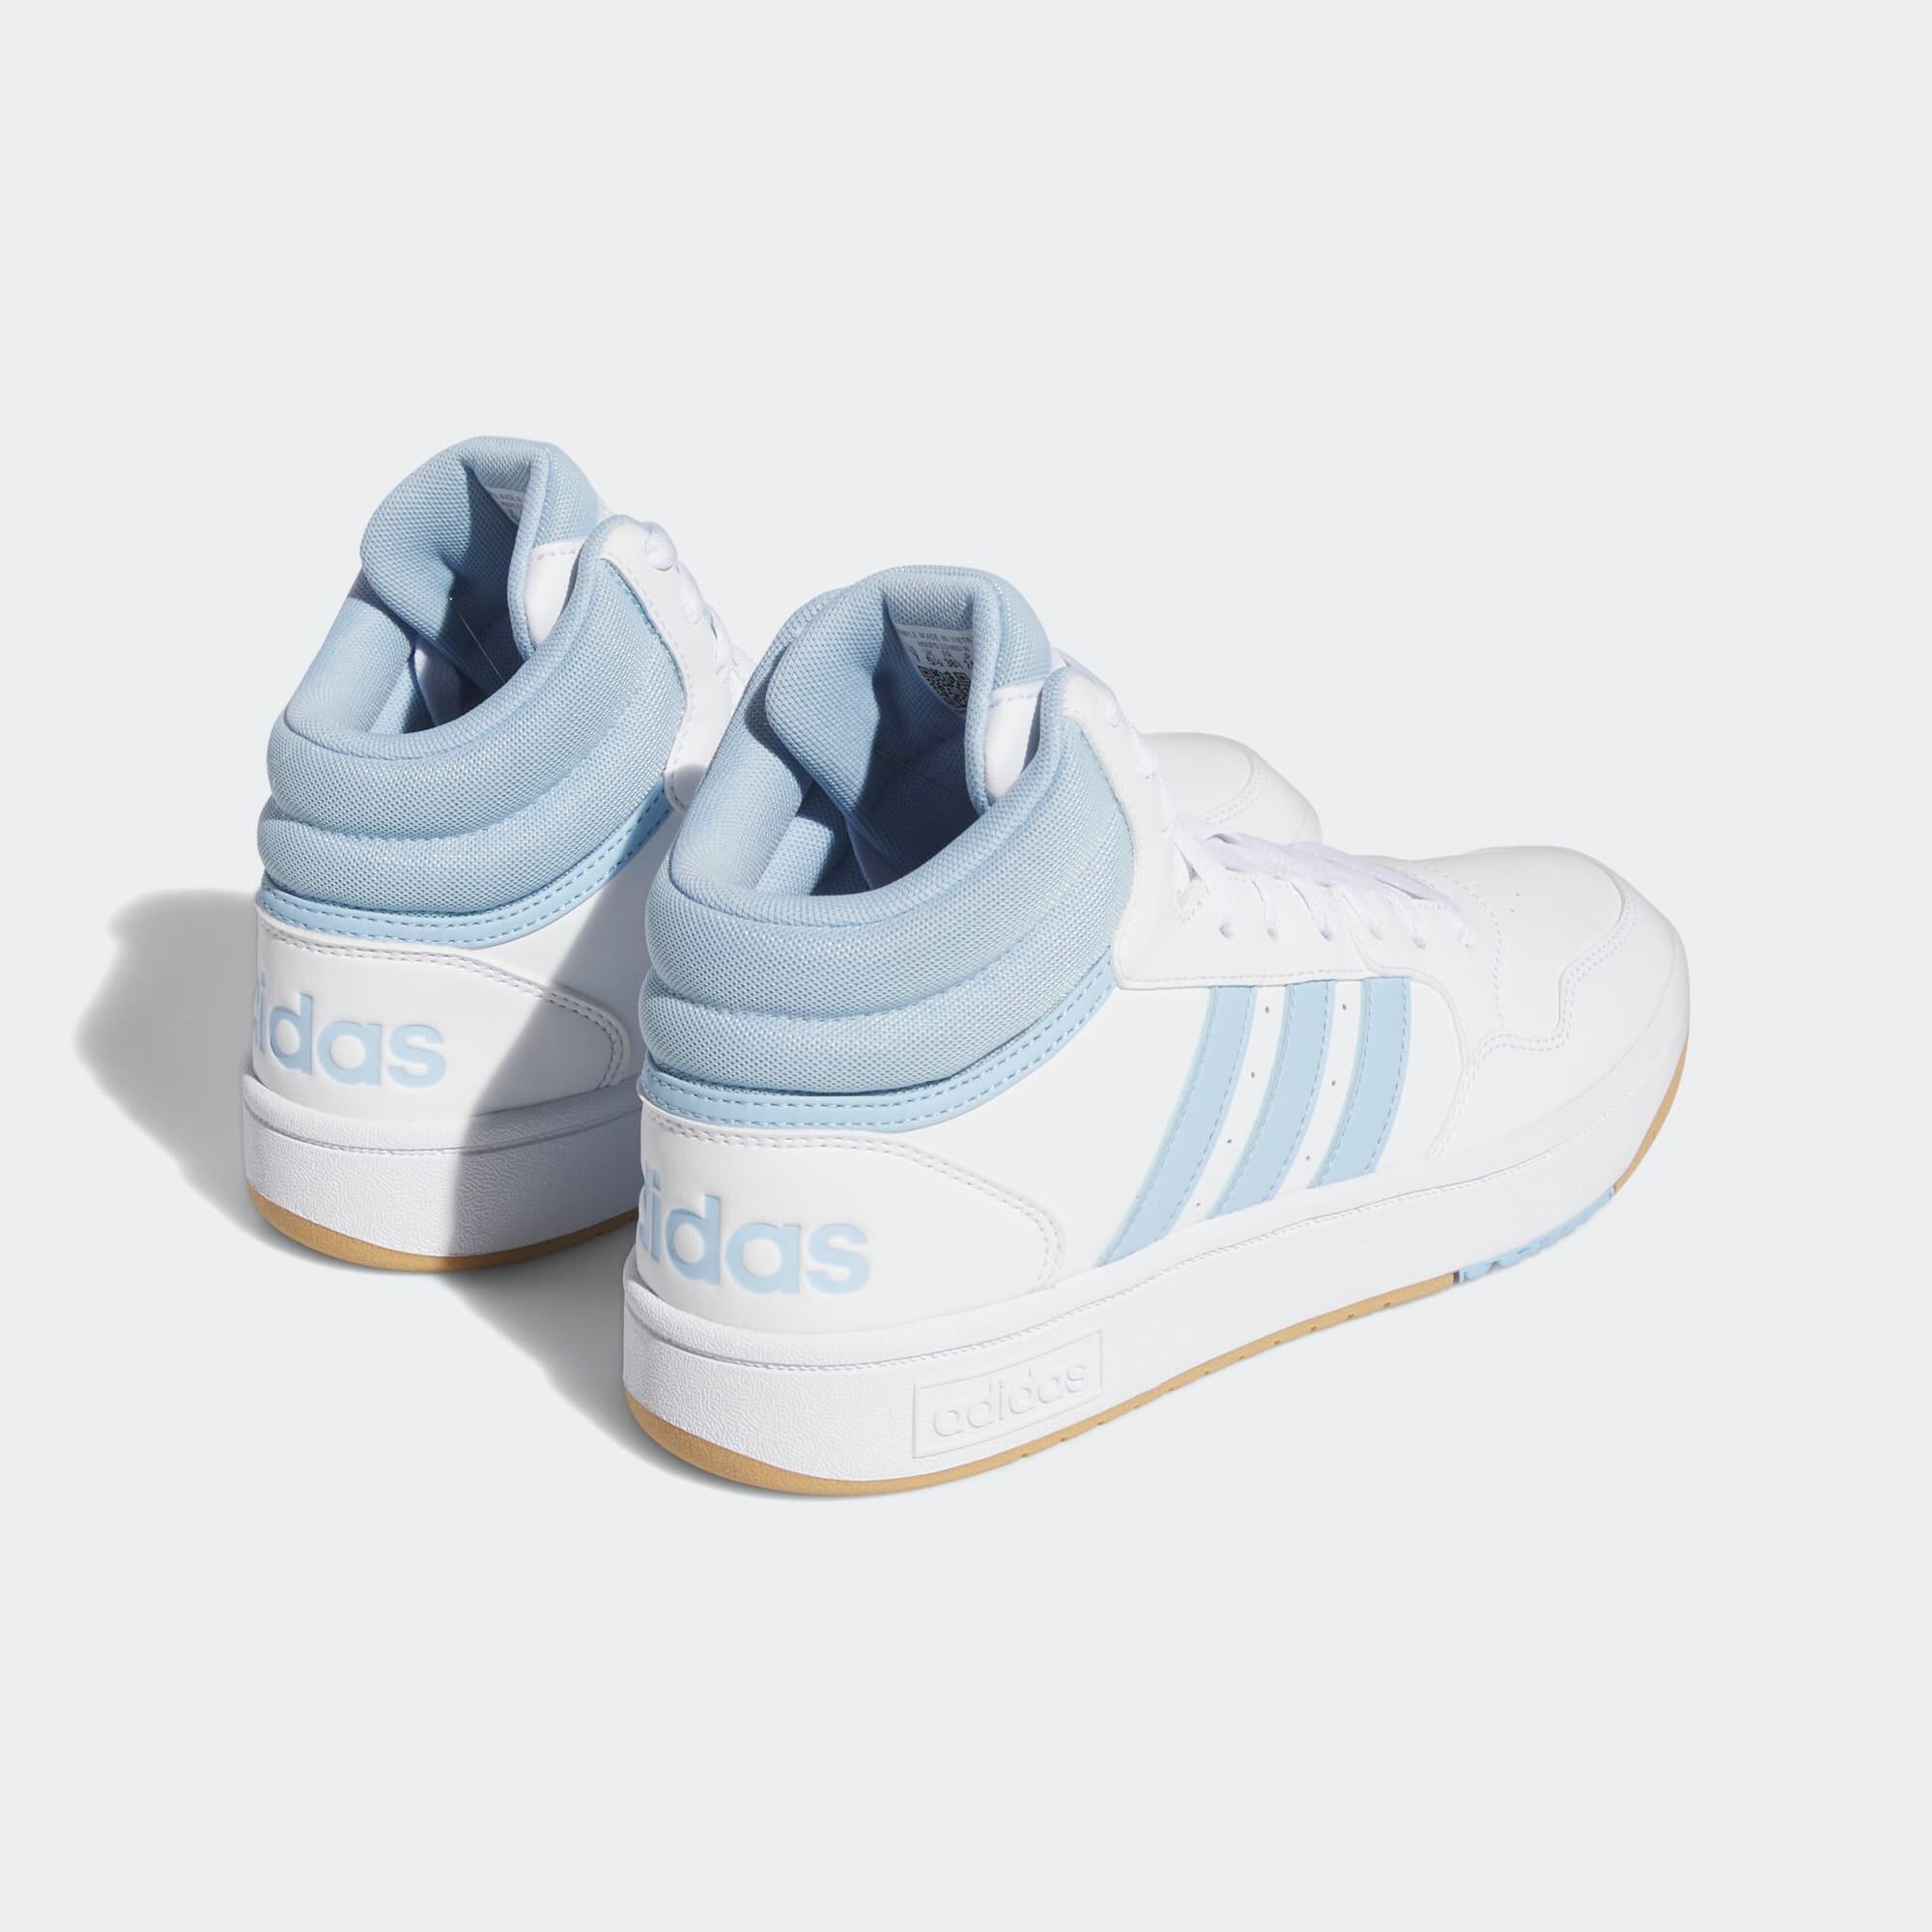 REFURBISHED WOMENS ADIDAS MID HOOPS 3.0 SHOES - WHITE - A GRADE 5/7